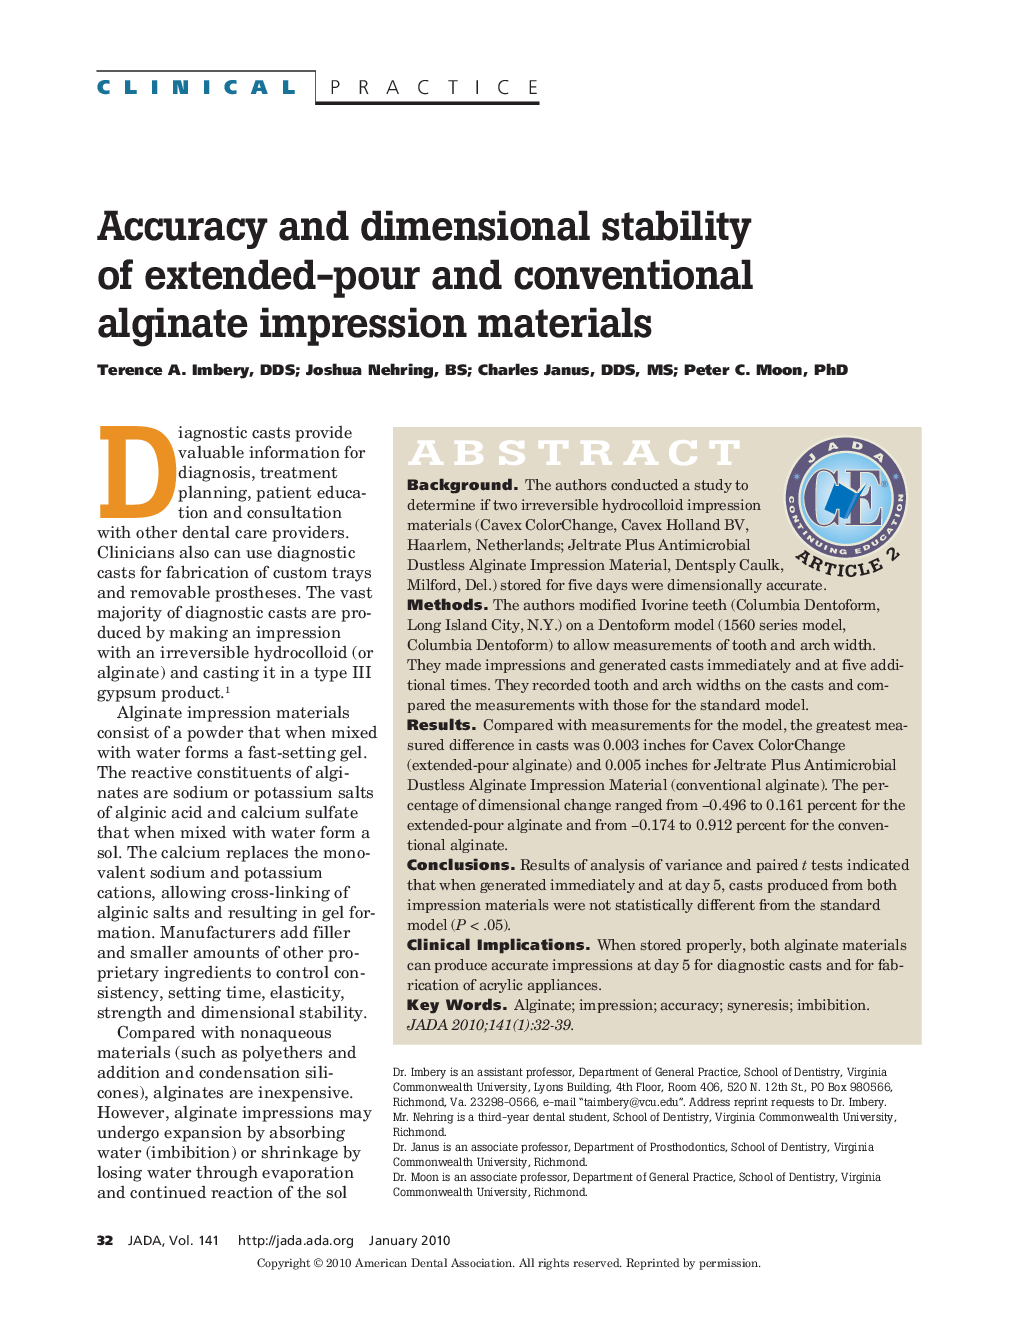 Accuracy and dimensional stability of extended-pour and conventional alginate impression materials 